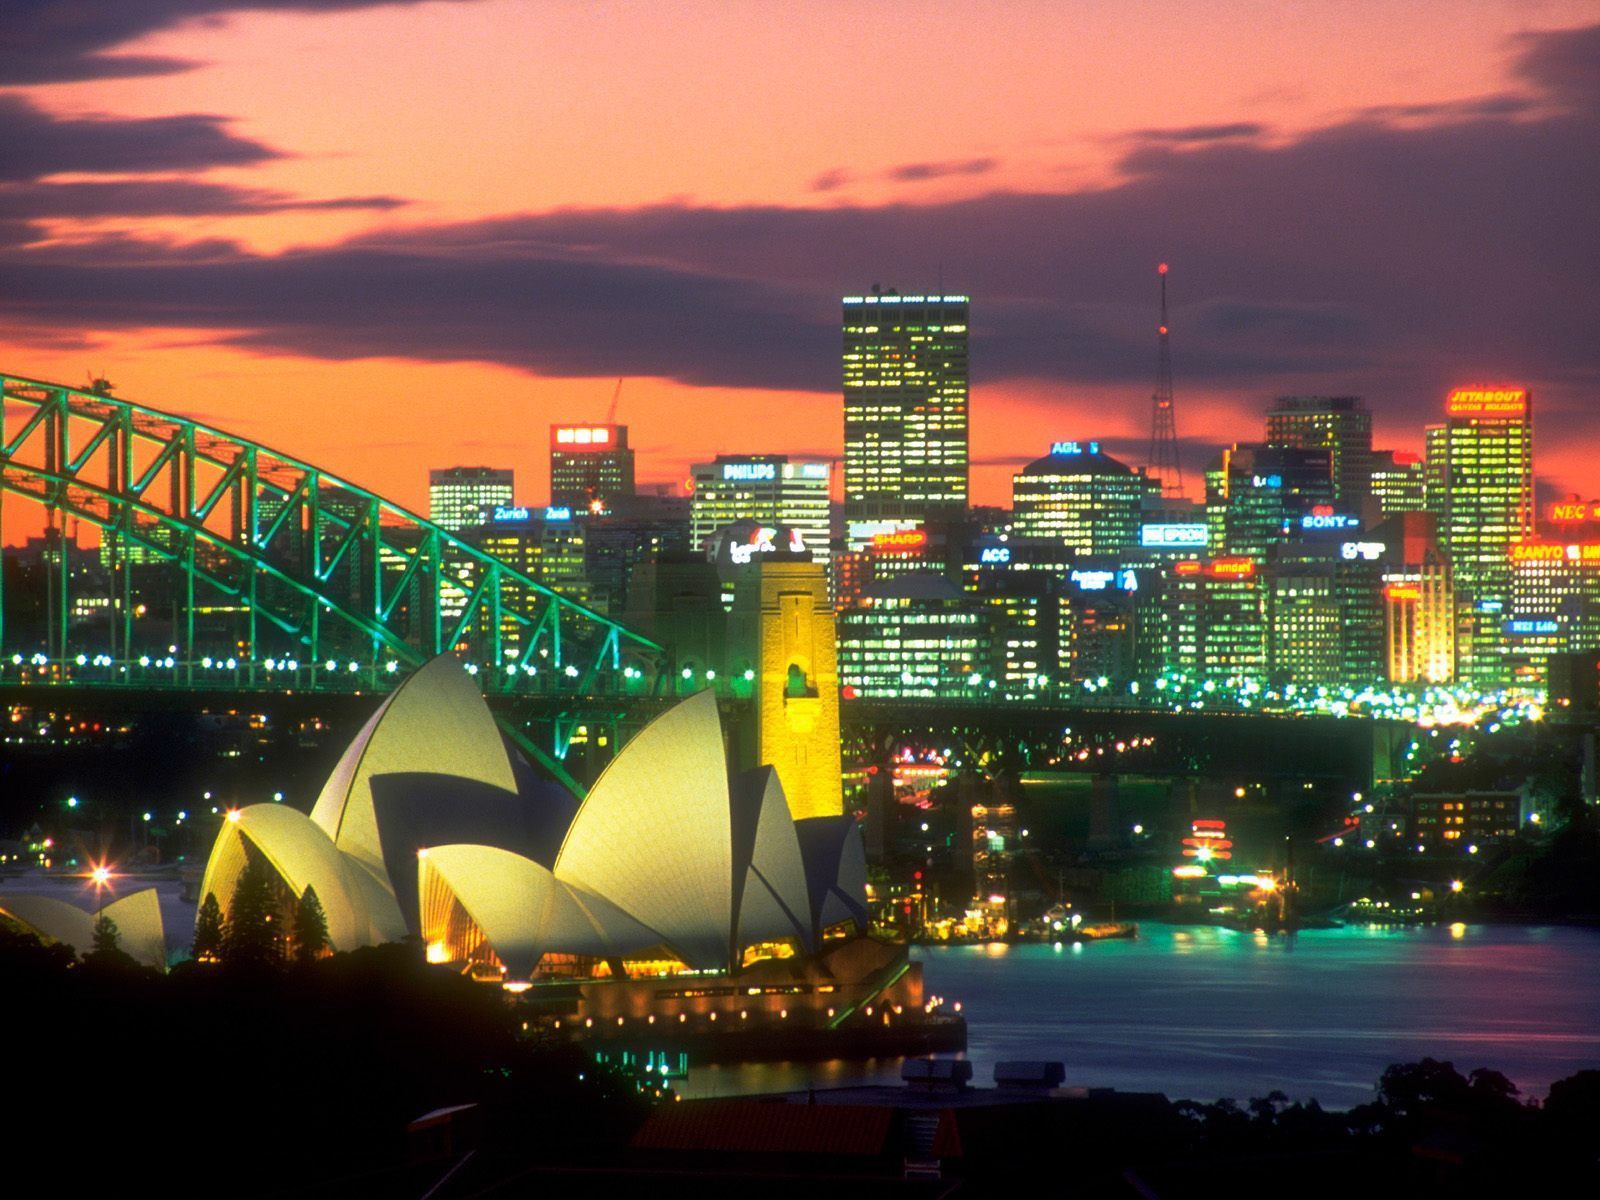 The lights of Sydney wallpapers and images - wallpapers, pictures ...